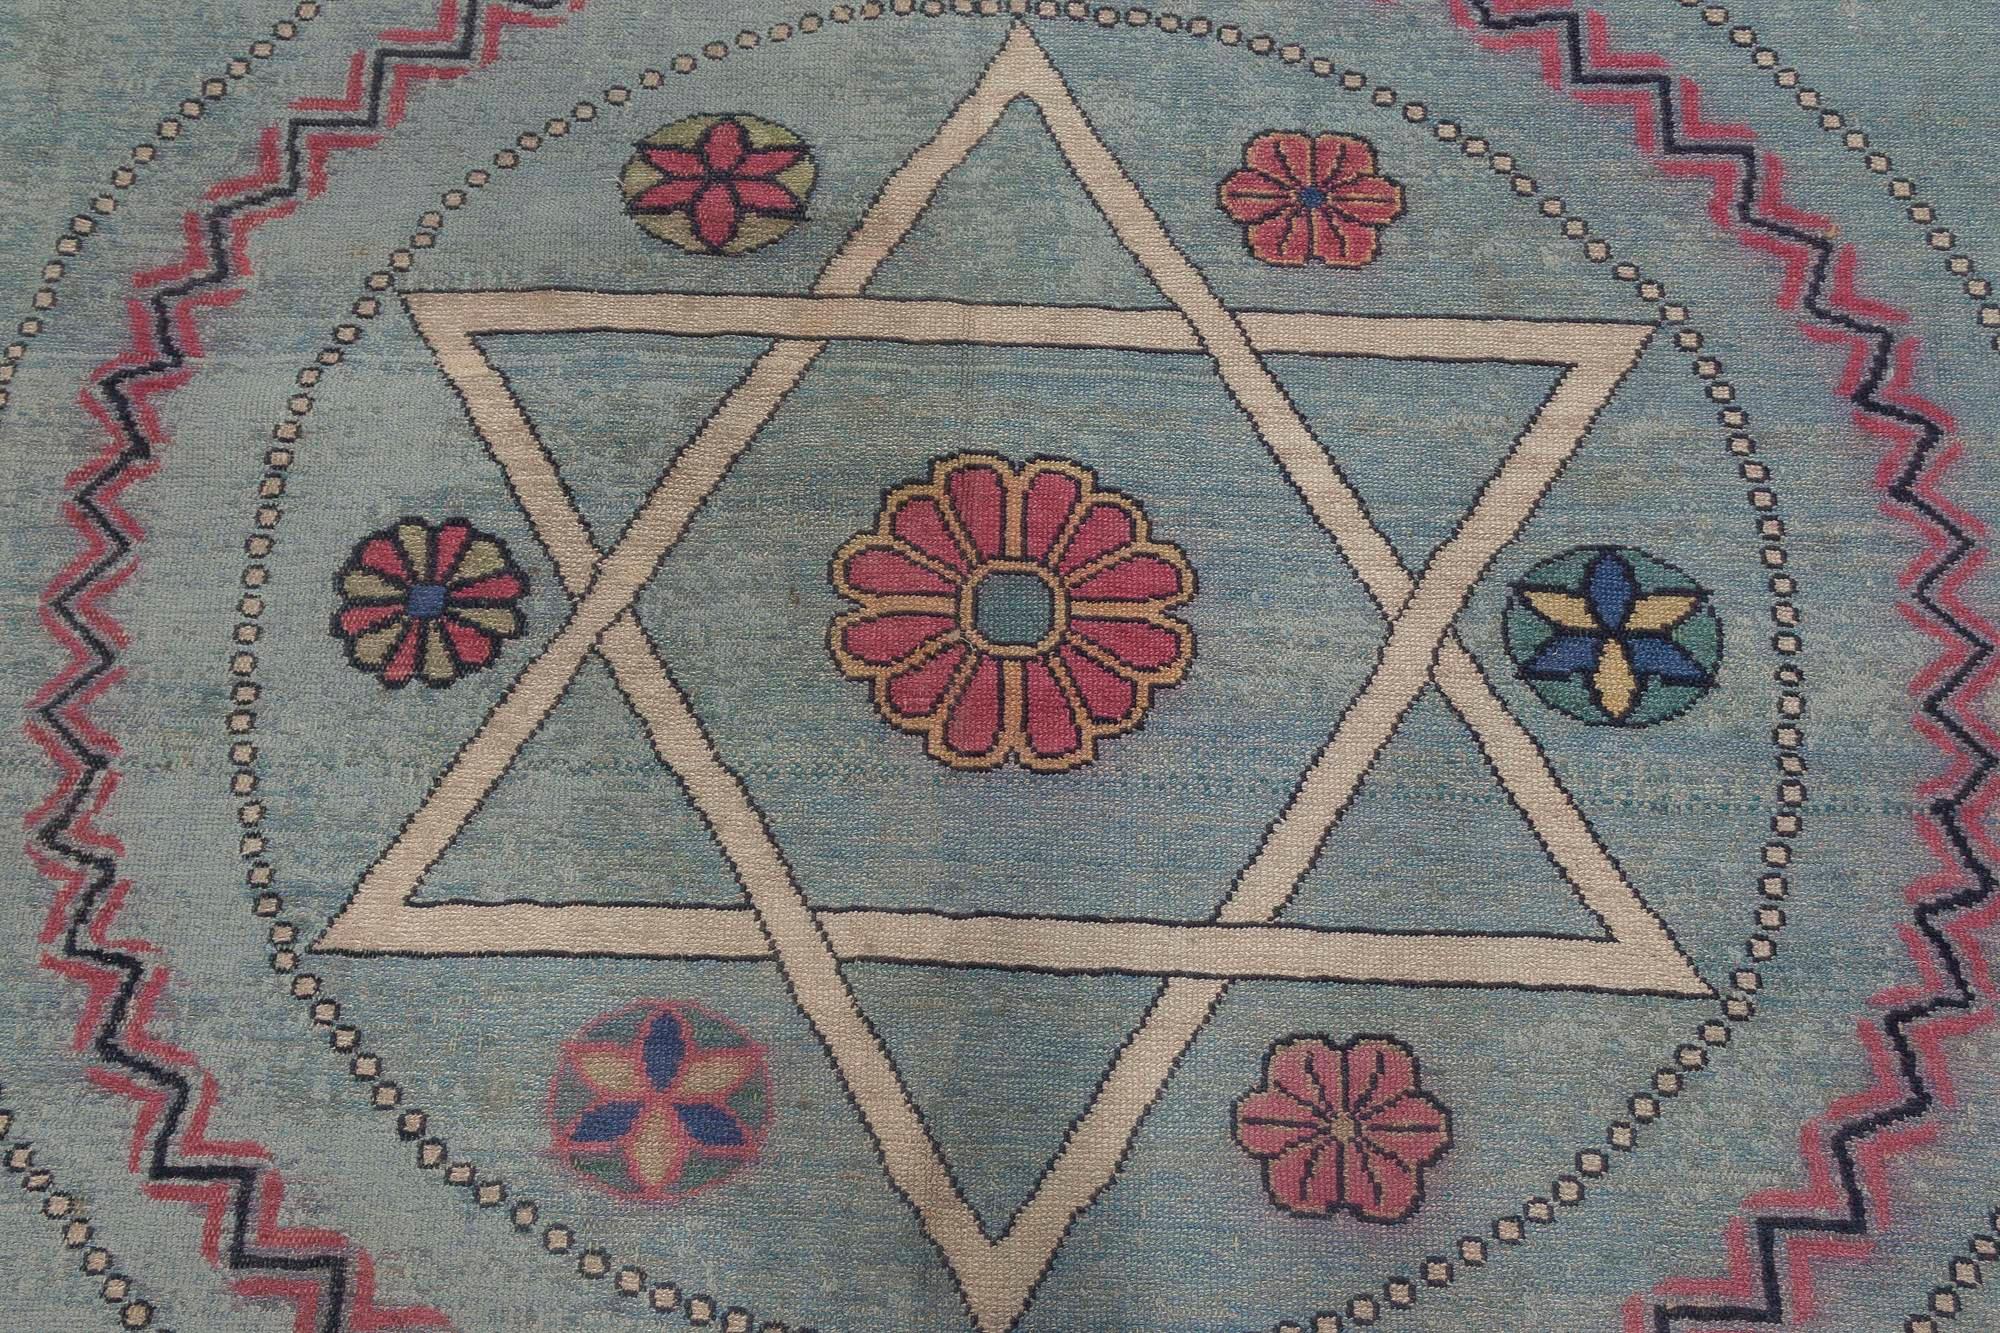 Jews David Star blue and red handwoven wool Marbadia rug
Size: 12'5